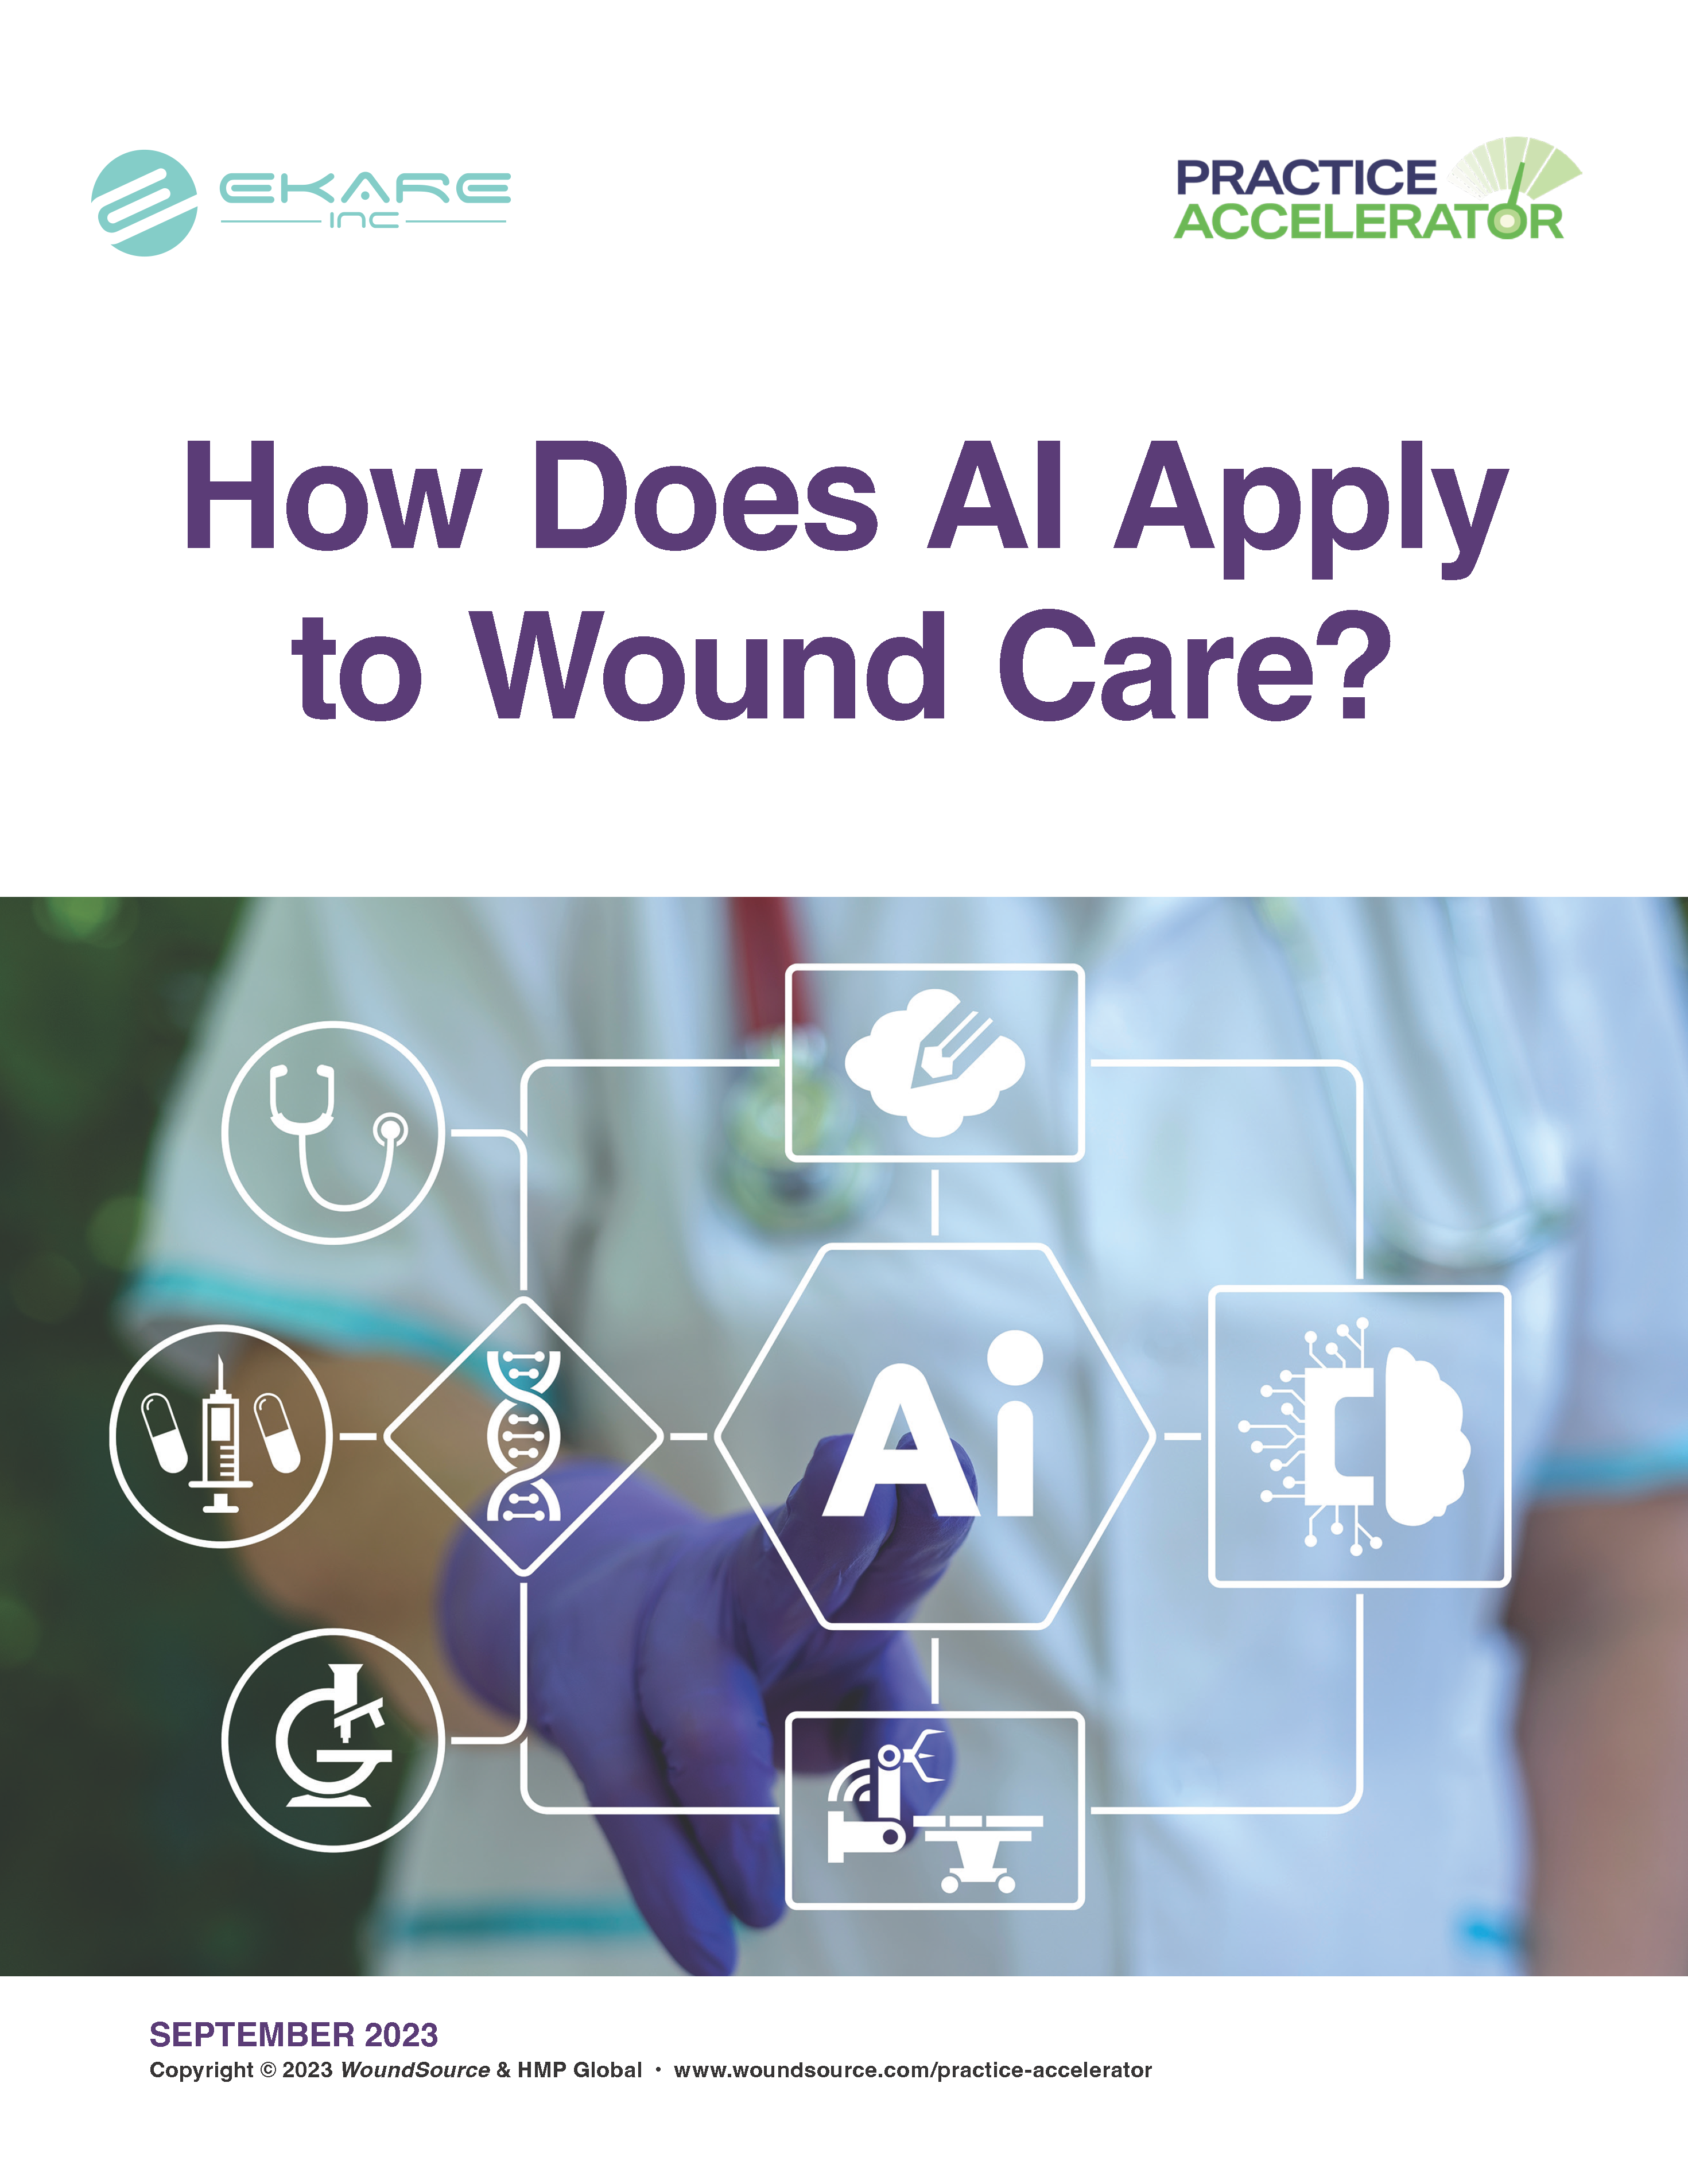 How Does AI Apply to Wound Care?